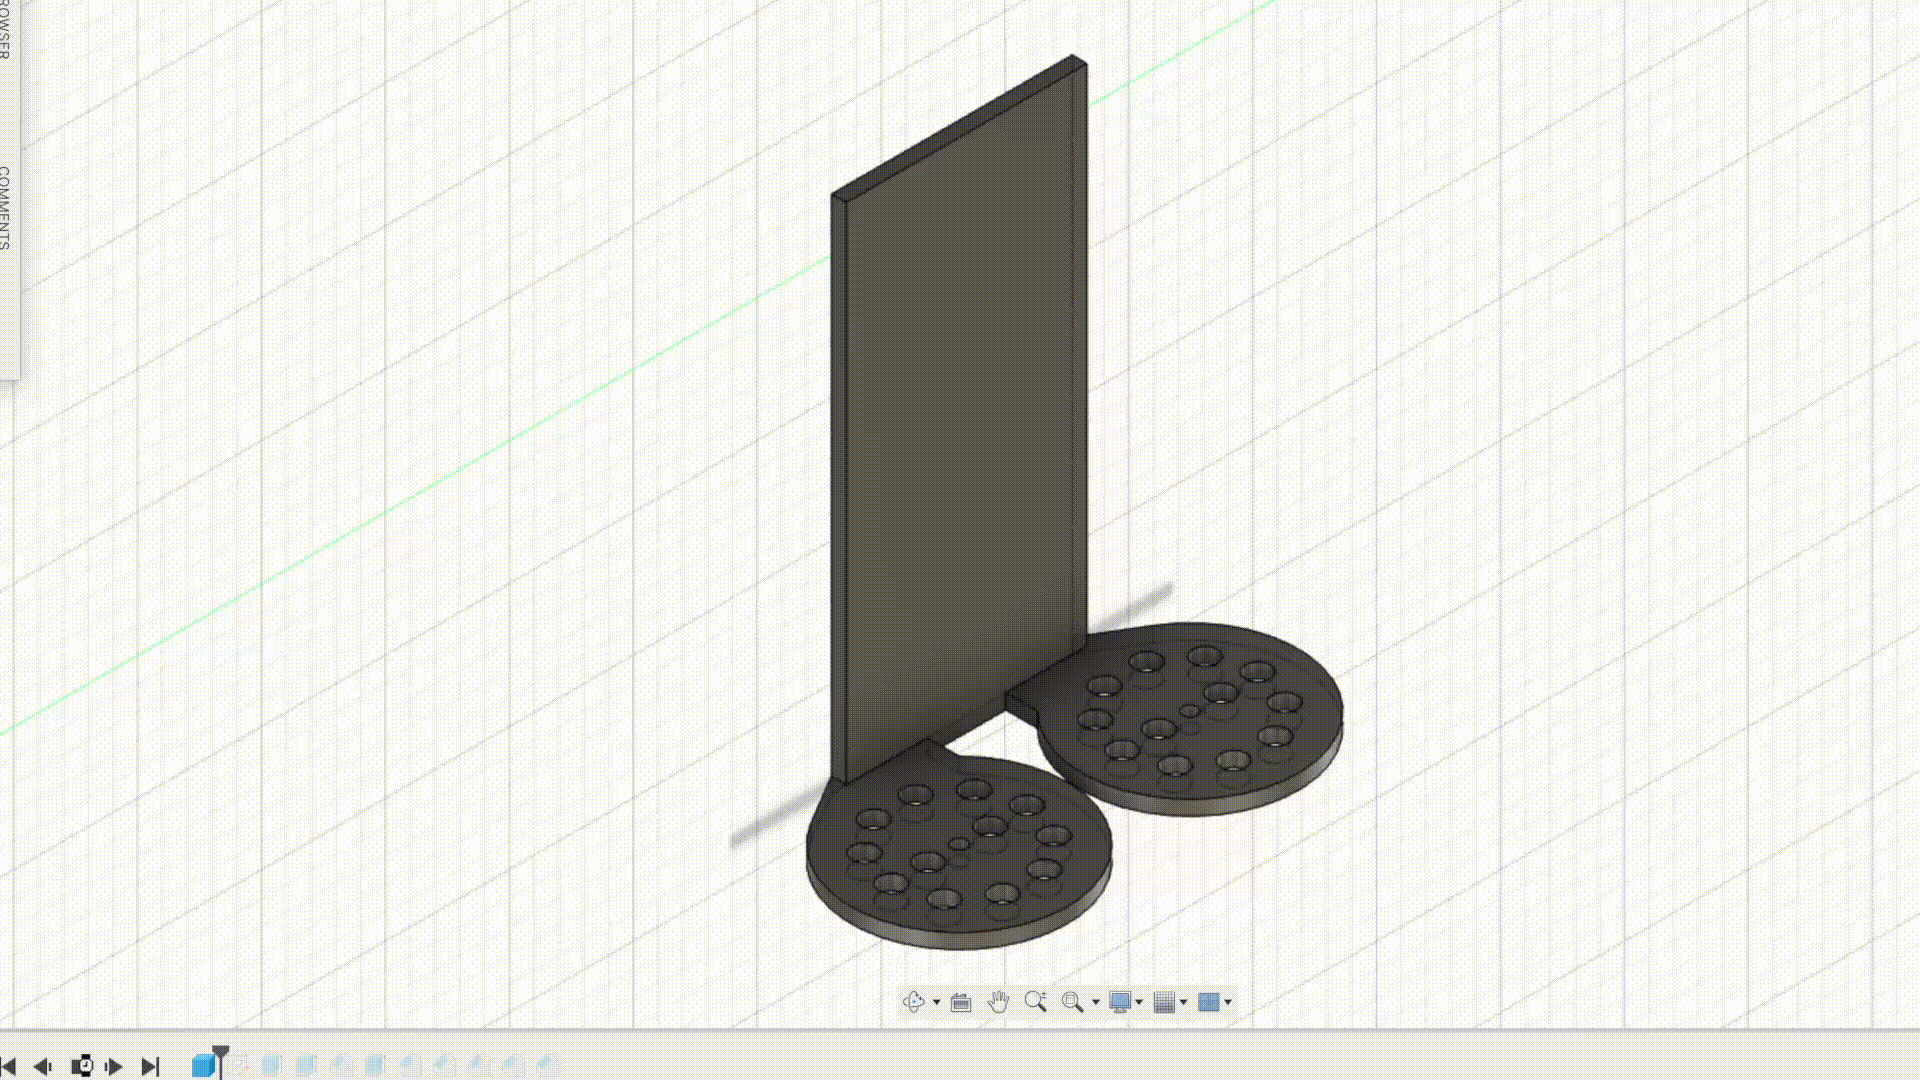 Autodesk Fusion 360 design animation of functional 3D printed double cylinder shower wall holder